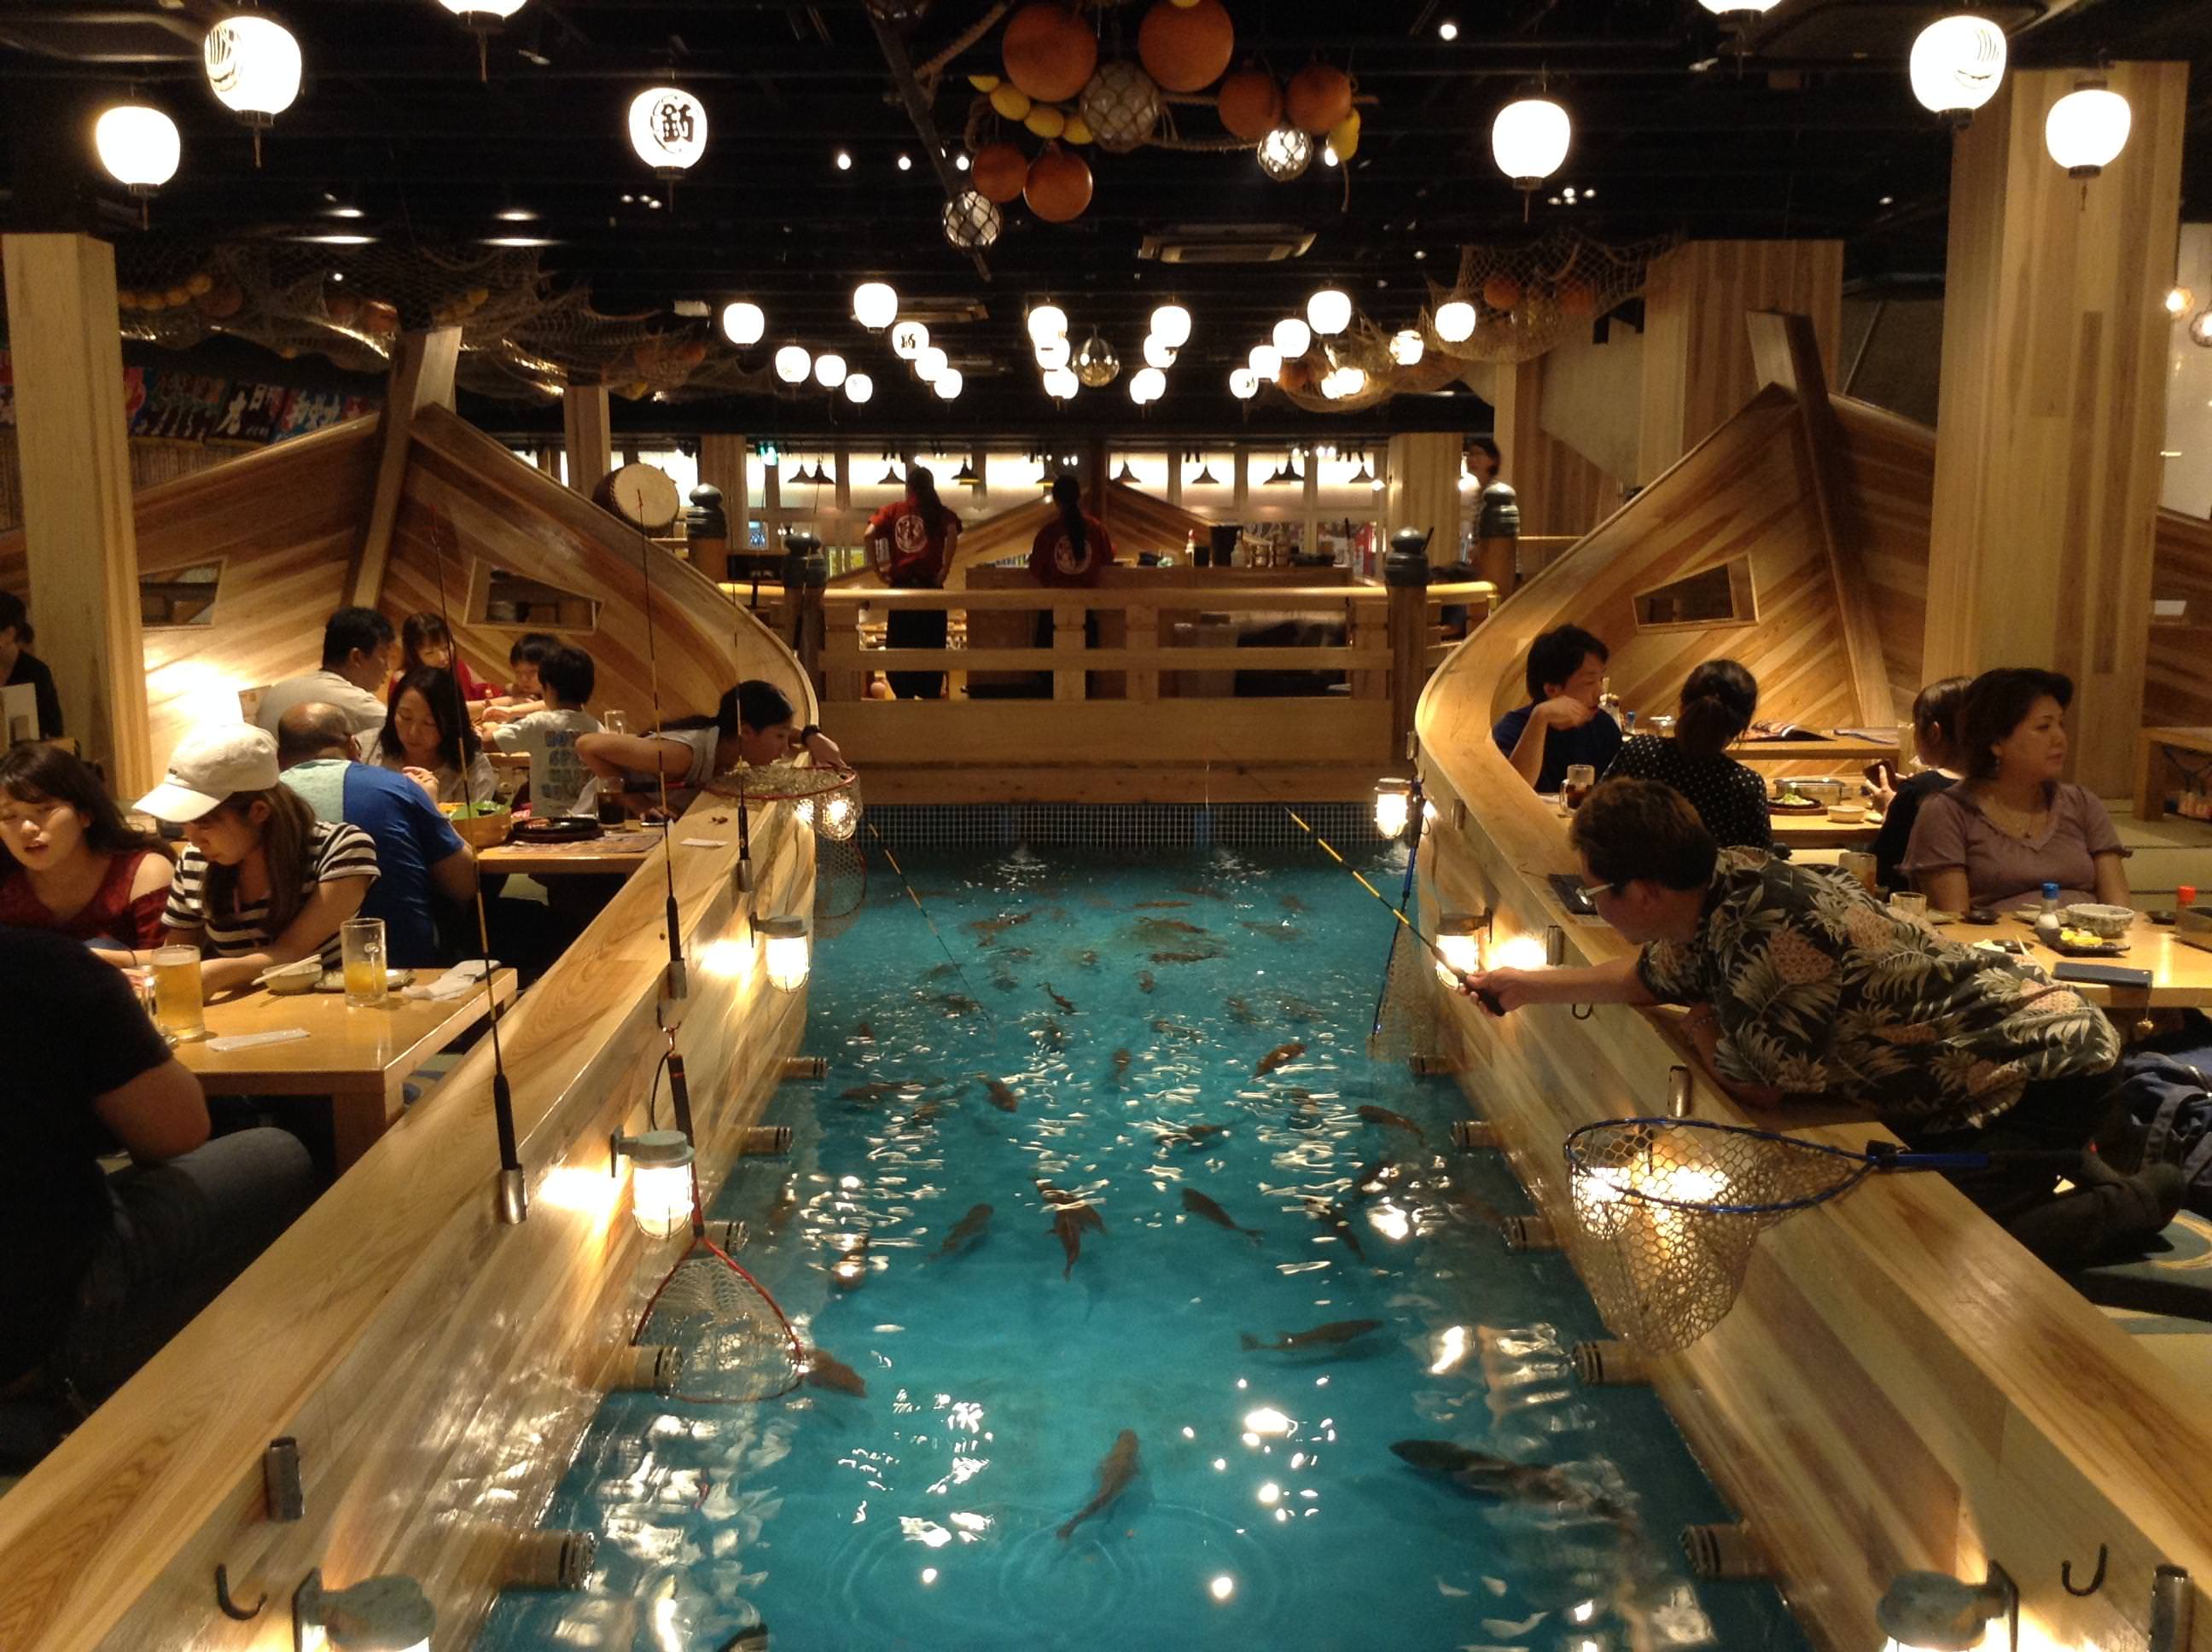 A Restaurant In Japan where you can catch your fish and have it cooked as your dinner